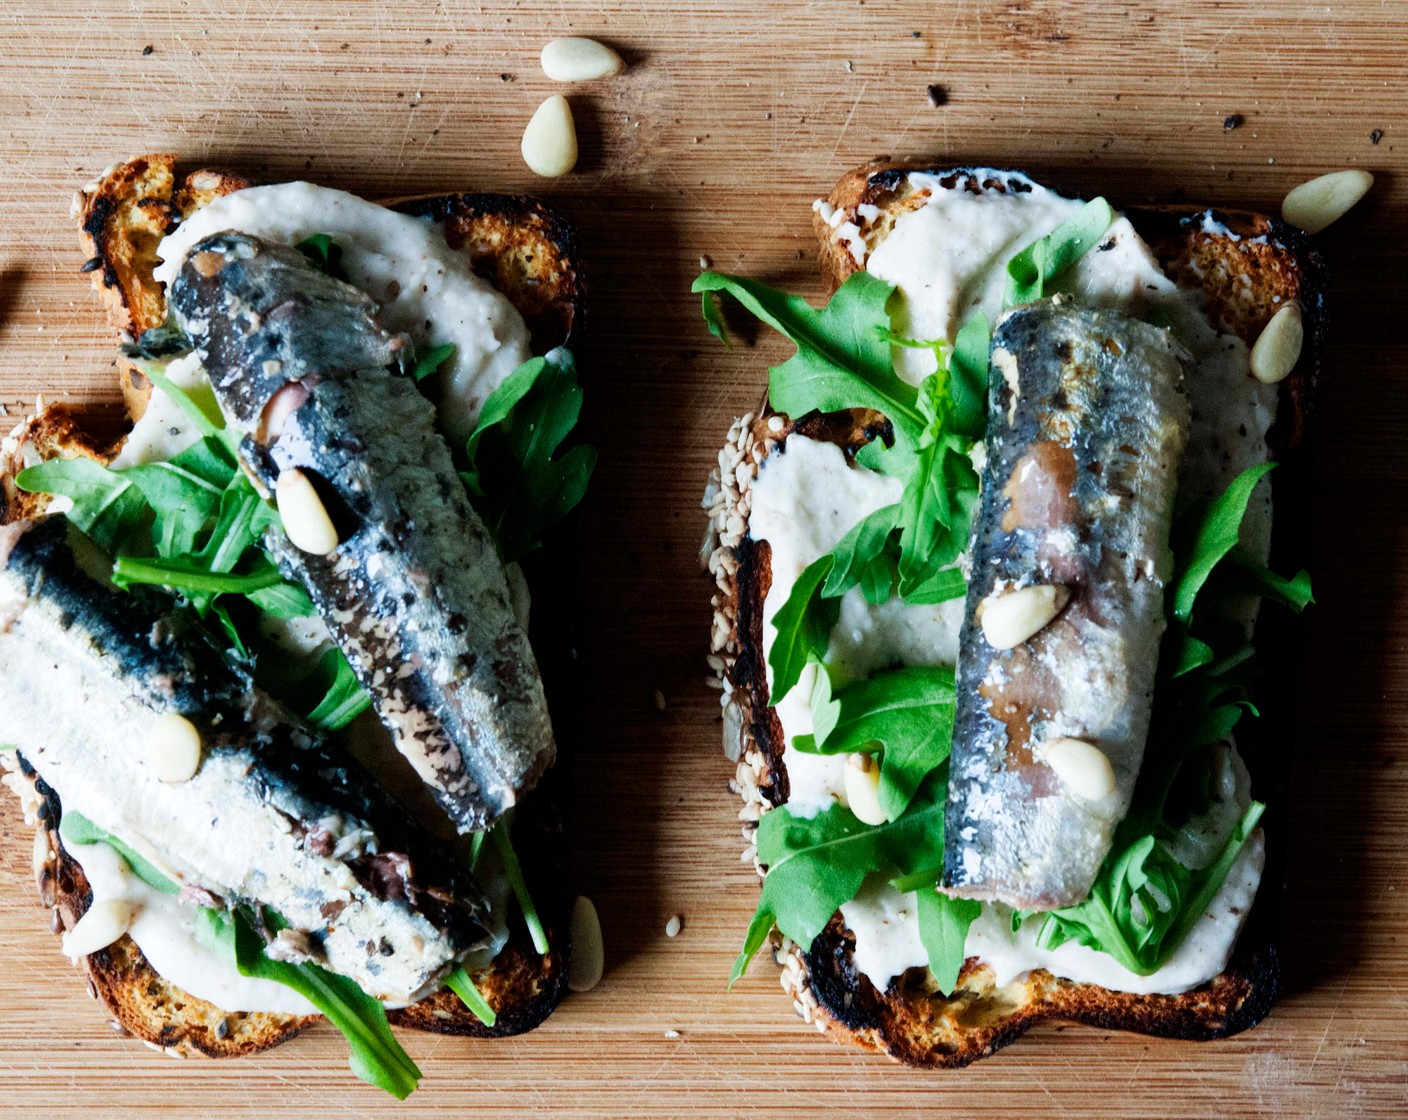 Toasted Bread with Canned Sardines and White Bean Purée